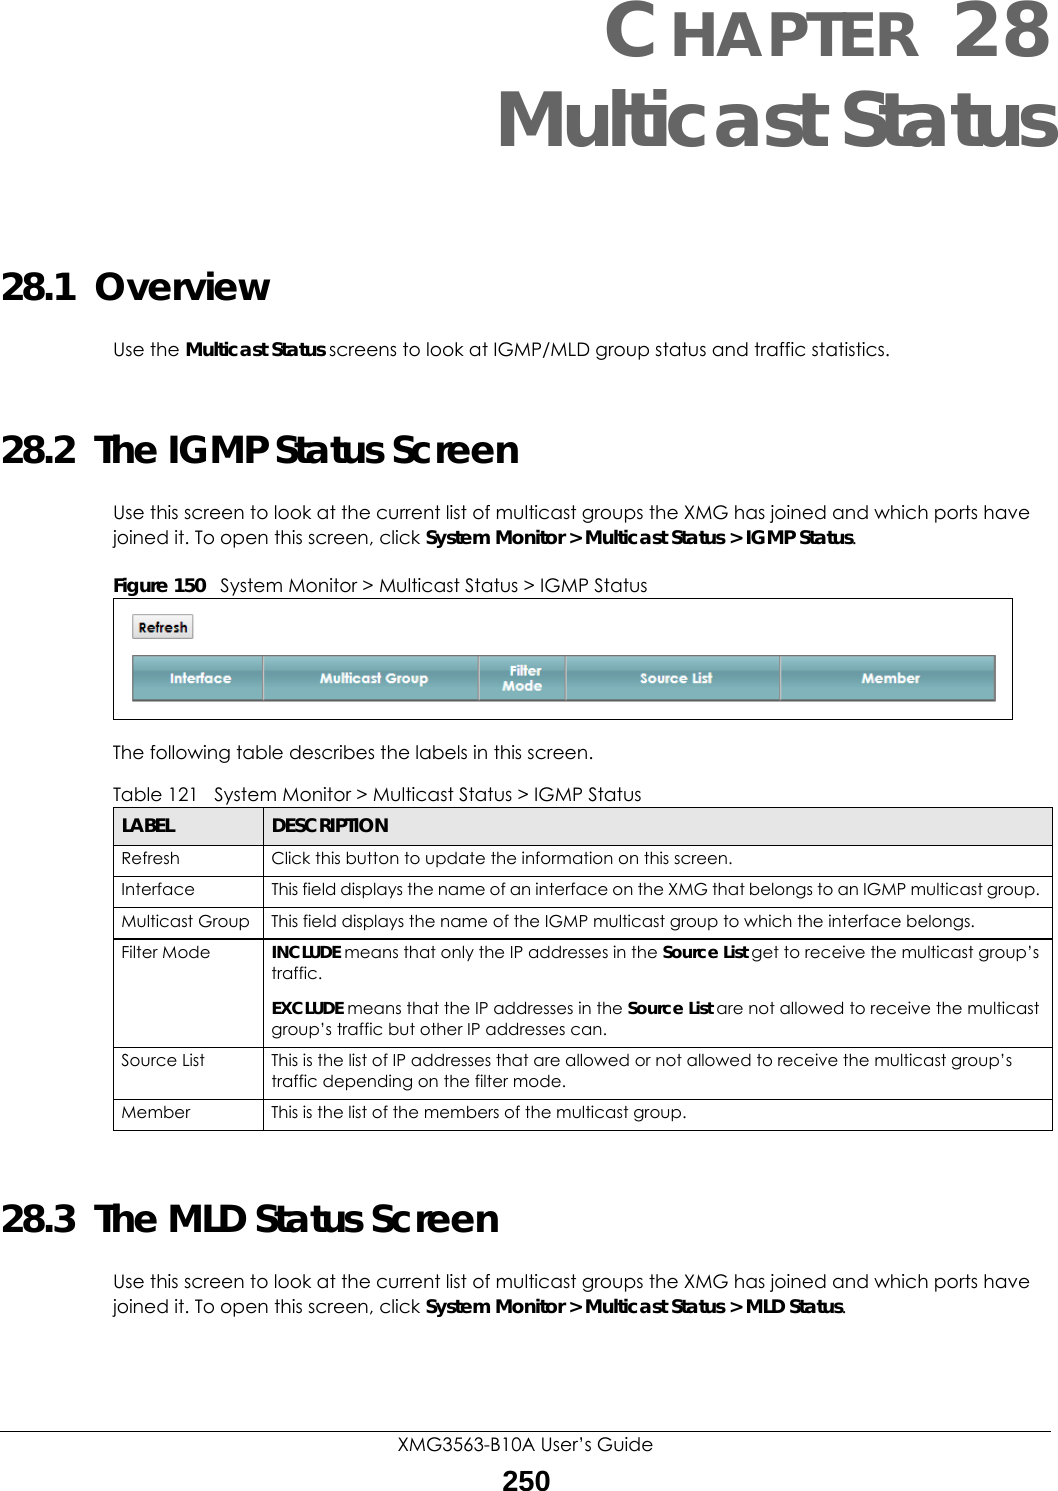 XMG3563-B10A User’s Guide250CHAPTER 28Multicast Status28.1  OverviewUse the Multicast Status screens to look at IGMP/MLD group status and traffic statistics. 28.2  The IGMP Status ScreenUse this screen to look at the current list of multicast groups the XMG has joined and which ports have joined it. To open this screen, click System Monitor &gt; Multicast Status &gt; IGMP Status.Figure 150   System Monitor &gt; Multicast Status &gt; IGMP StatusThe following table describes the labels in this screen.28.3  The MLD Status ScreenUse this screen to look at the current list of multicast groups the XMG has joined and which ports have joined it. To open this screen, click System Monitor &gt; Multicast Status &gt; MLD Status.Table 121   System Monitor &gt; Multicast Status &gt; IGMP StatusLABEL DESCRIPTIONRefresh Click this button to update the information on this screen.Interface This field displays the name of an interface on the XMG that belongs to an IGMP multicast group. Multicast Group This field displays the name of the IGMP multicast group to which the interface belongs. Filter Mode  INCLUDE means that only the IP addresses in the Source List get to receive the multicast group’s traffic.EXCLUDE means that the IP addresses in the Source List are not allowed to receive the multicast group’s traffic but other IP addresses can.Source List This is the list of IP addresses that are allowed or not allowed to receive the multicast group’s traffic depending on the filter mode.Member This is the list of the members of the multicast group.